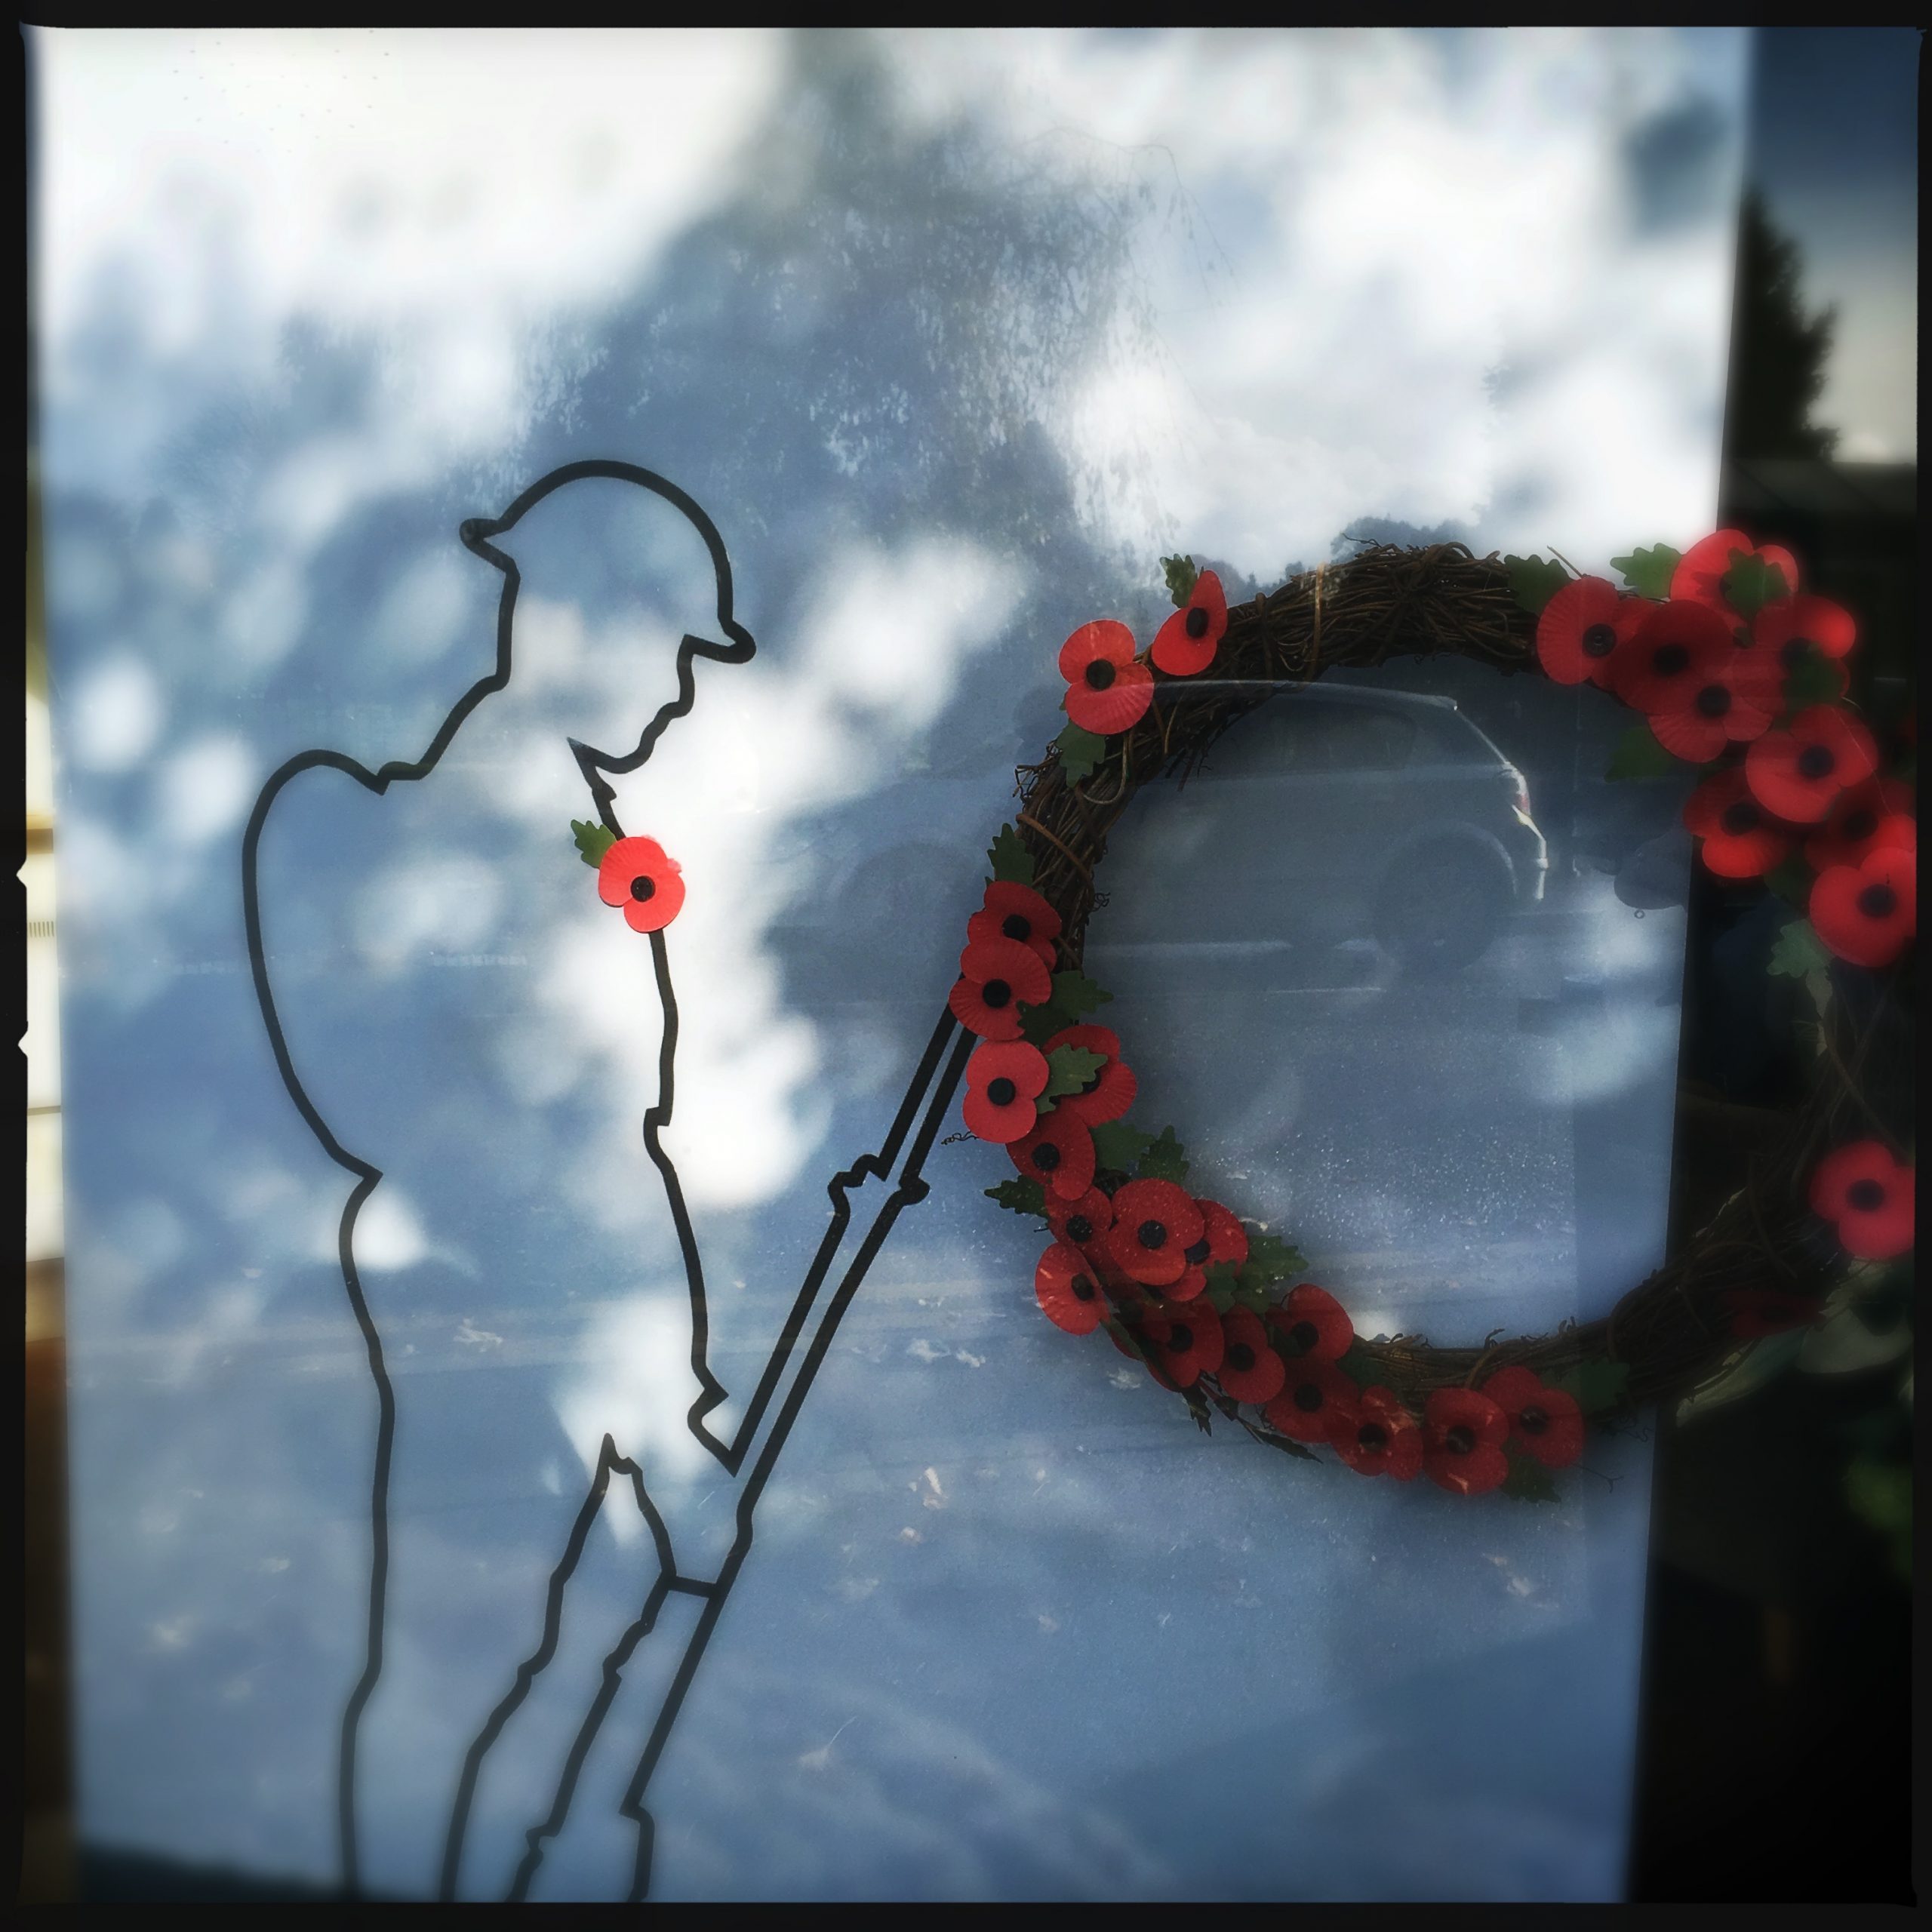 Lodge Brothers, Englefield Green says: “Lest We Forget”